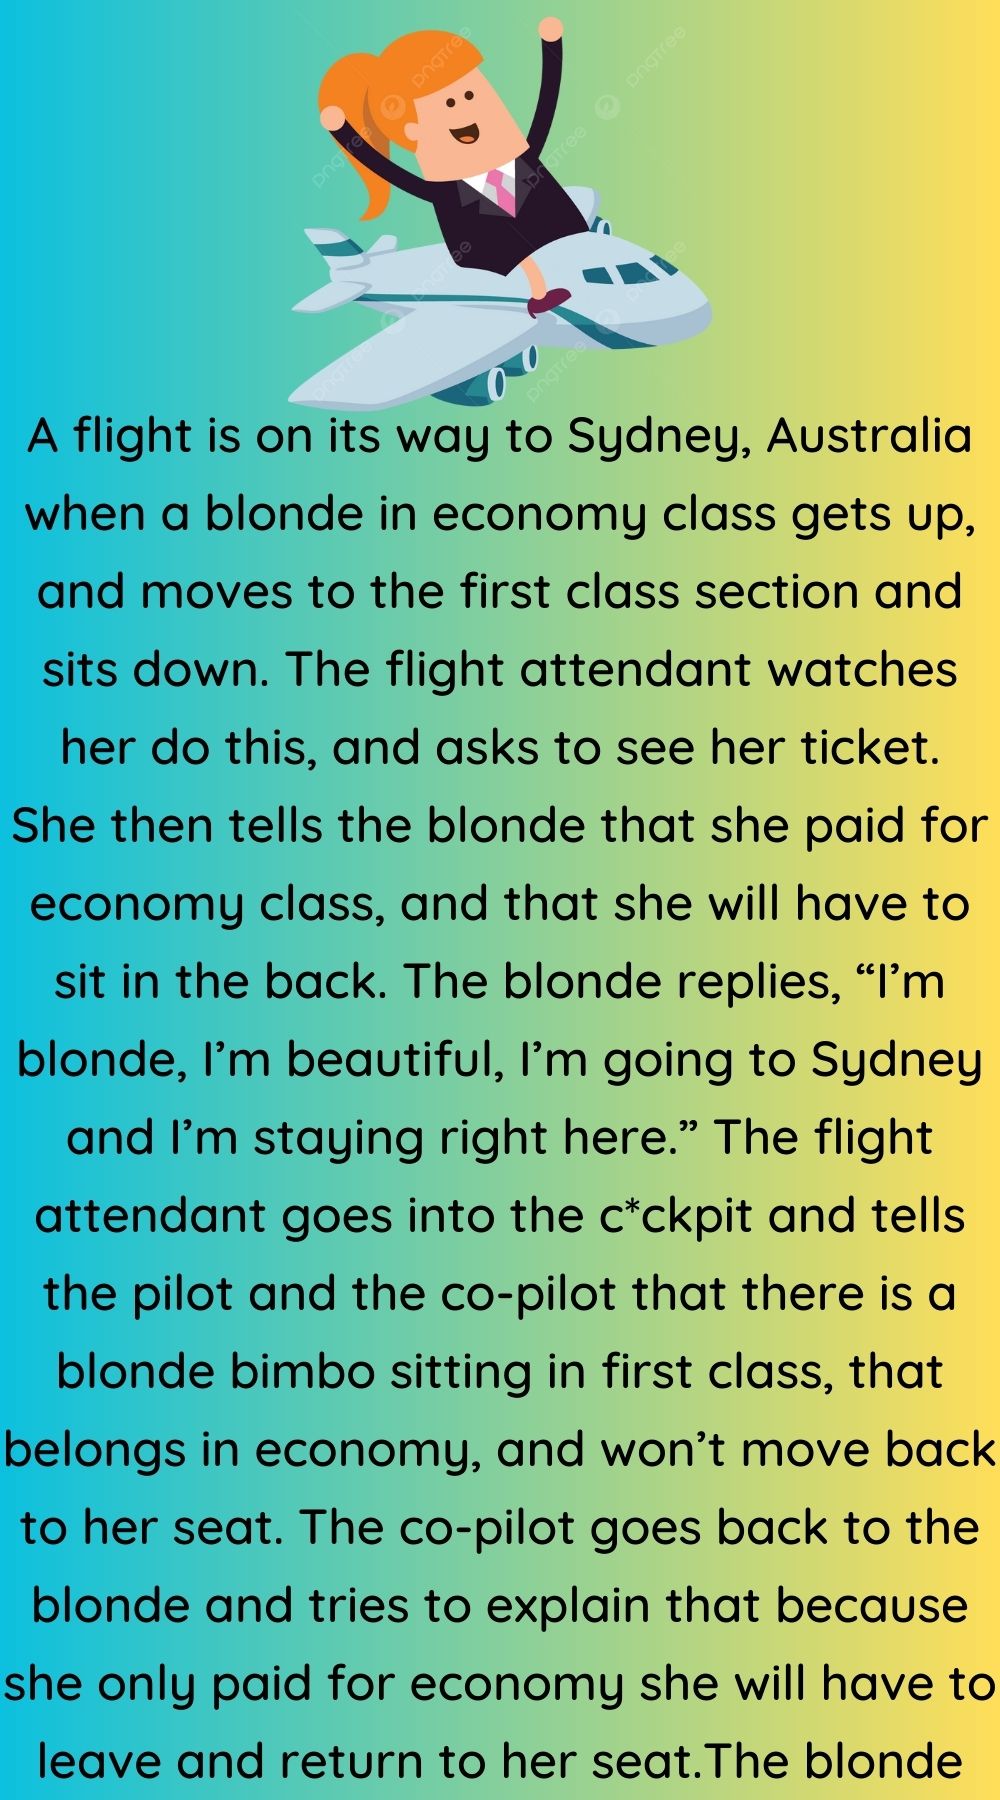 A flight is on its way to Sydney